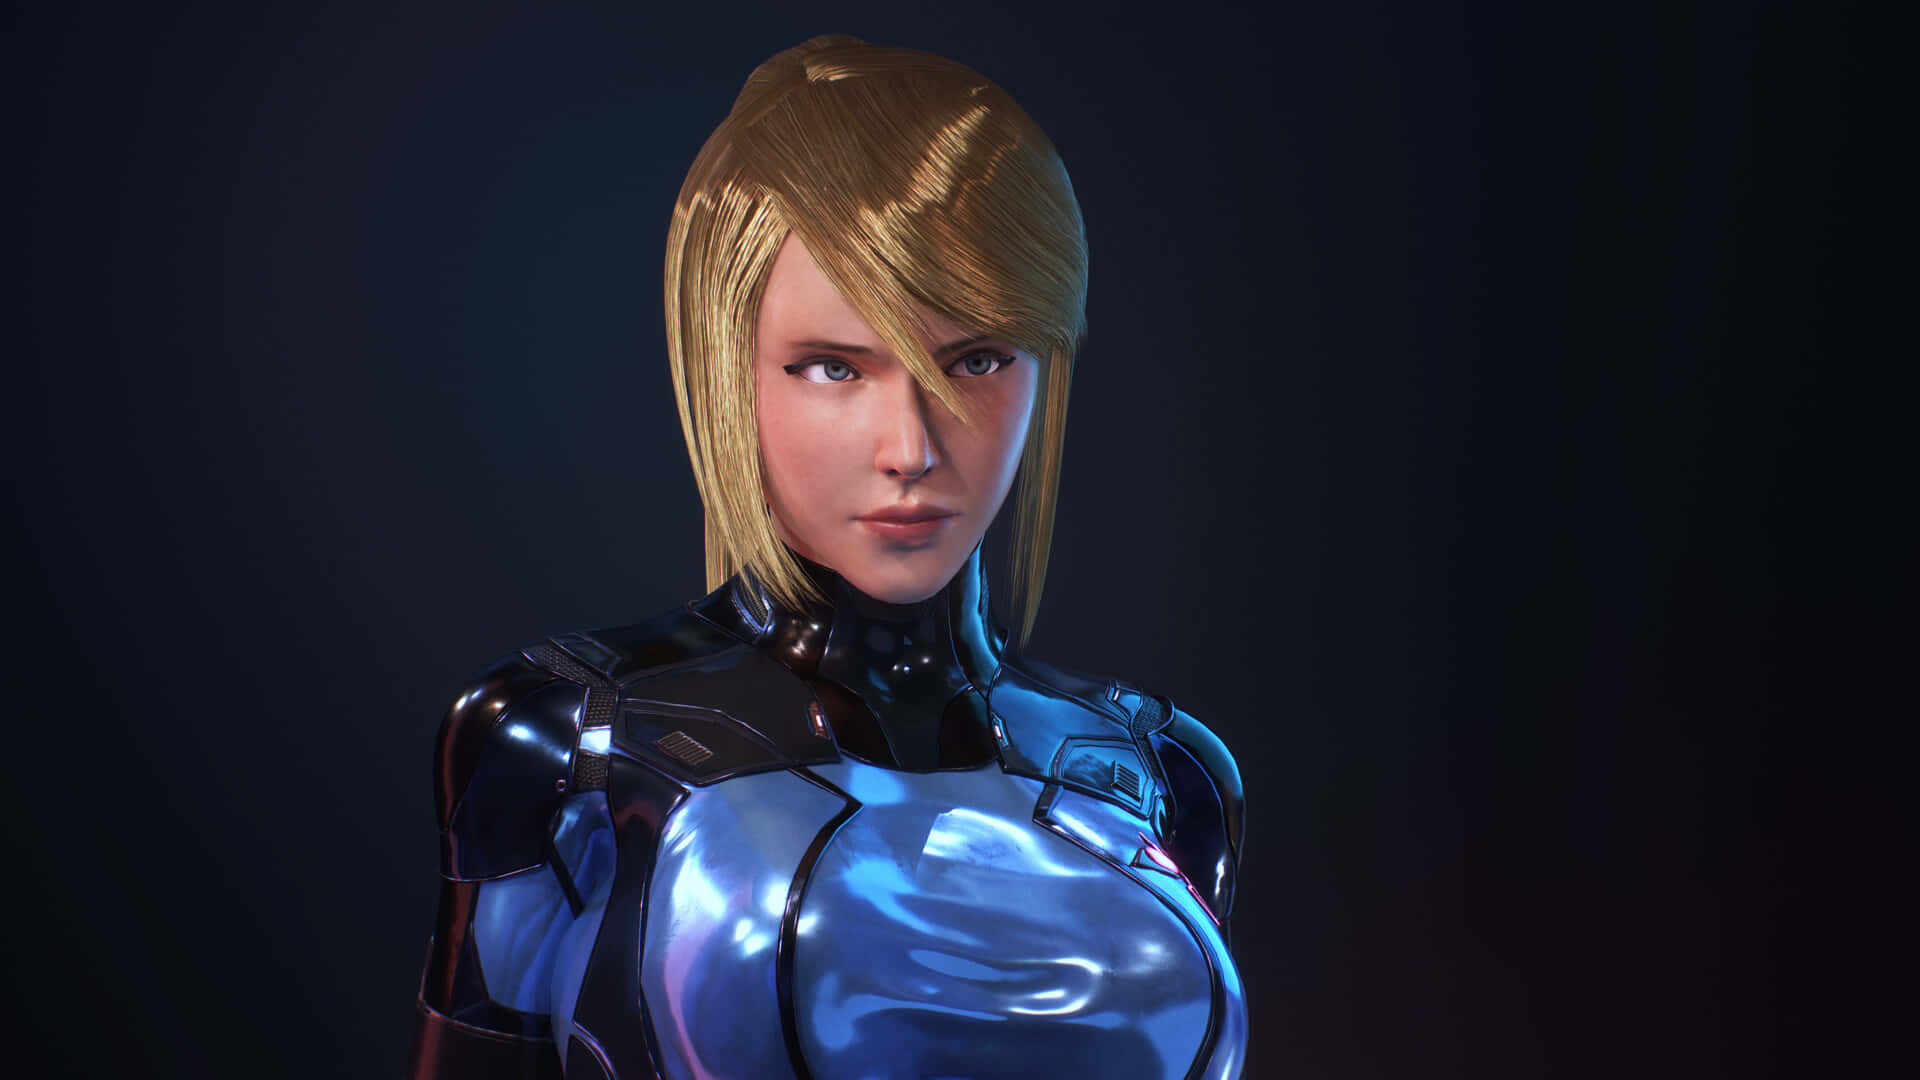 Get ready to fight with Zero Suit Samus Wallpaper